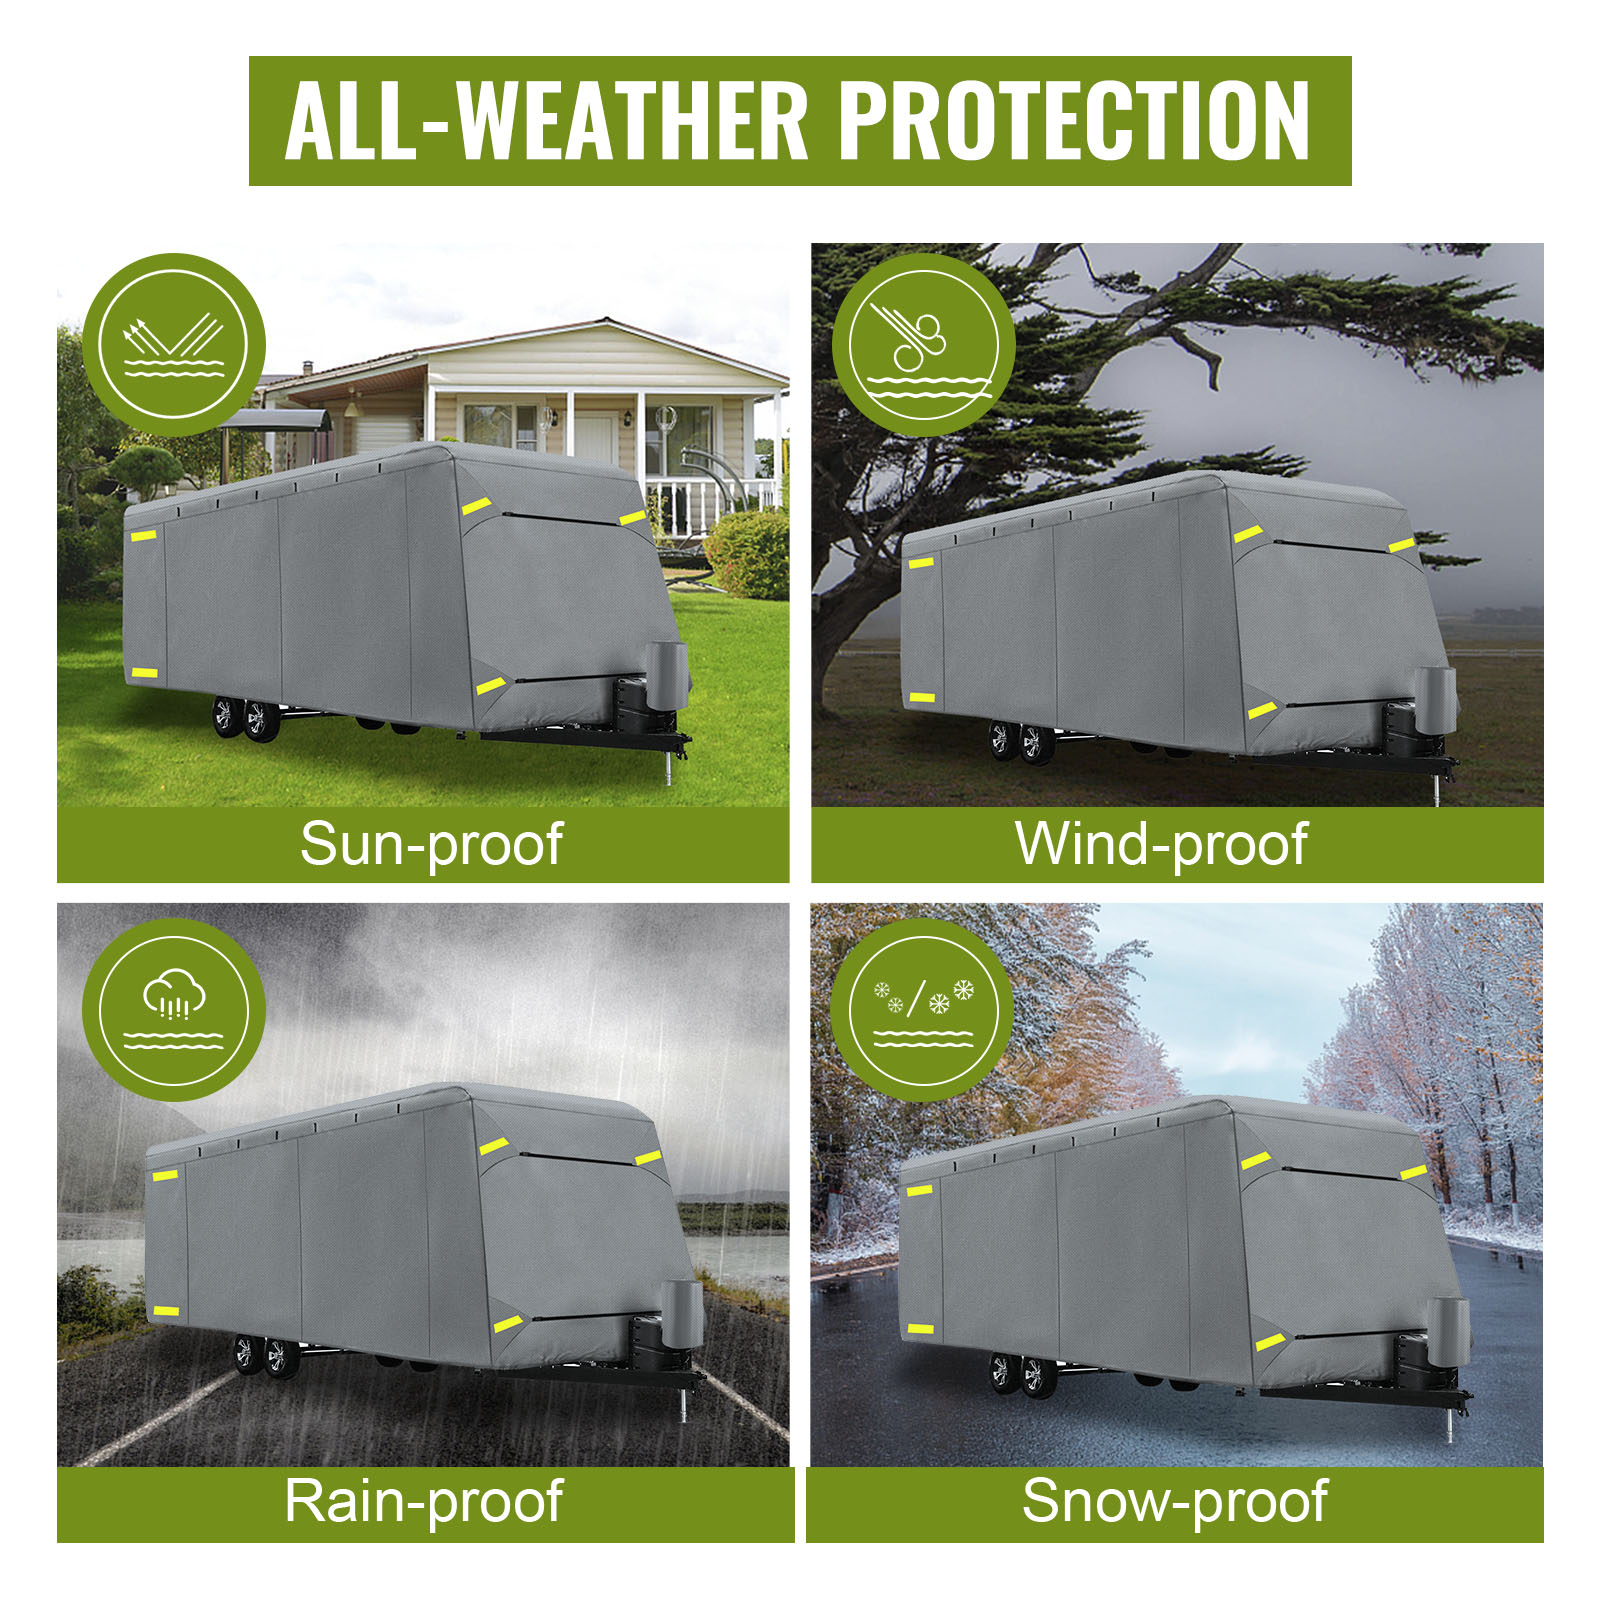 SHOAL CREEK COMPANY 27-30 TRAVEL TRAILER COVER SHIPPING INCLUDED 